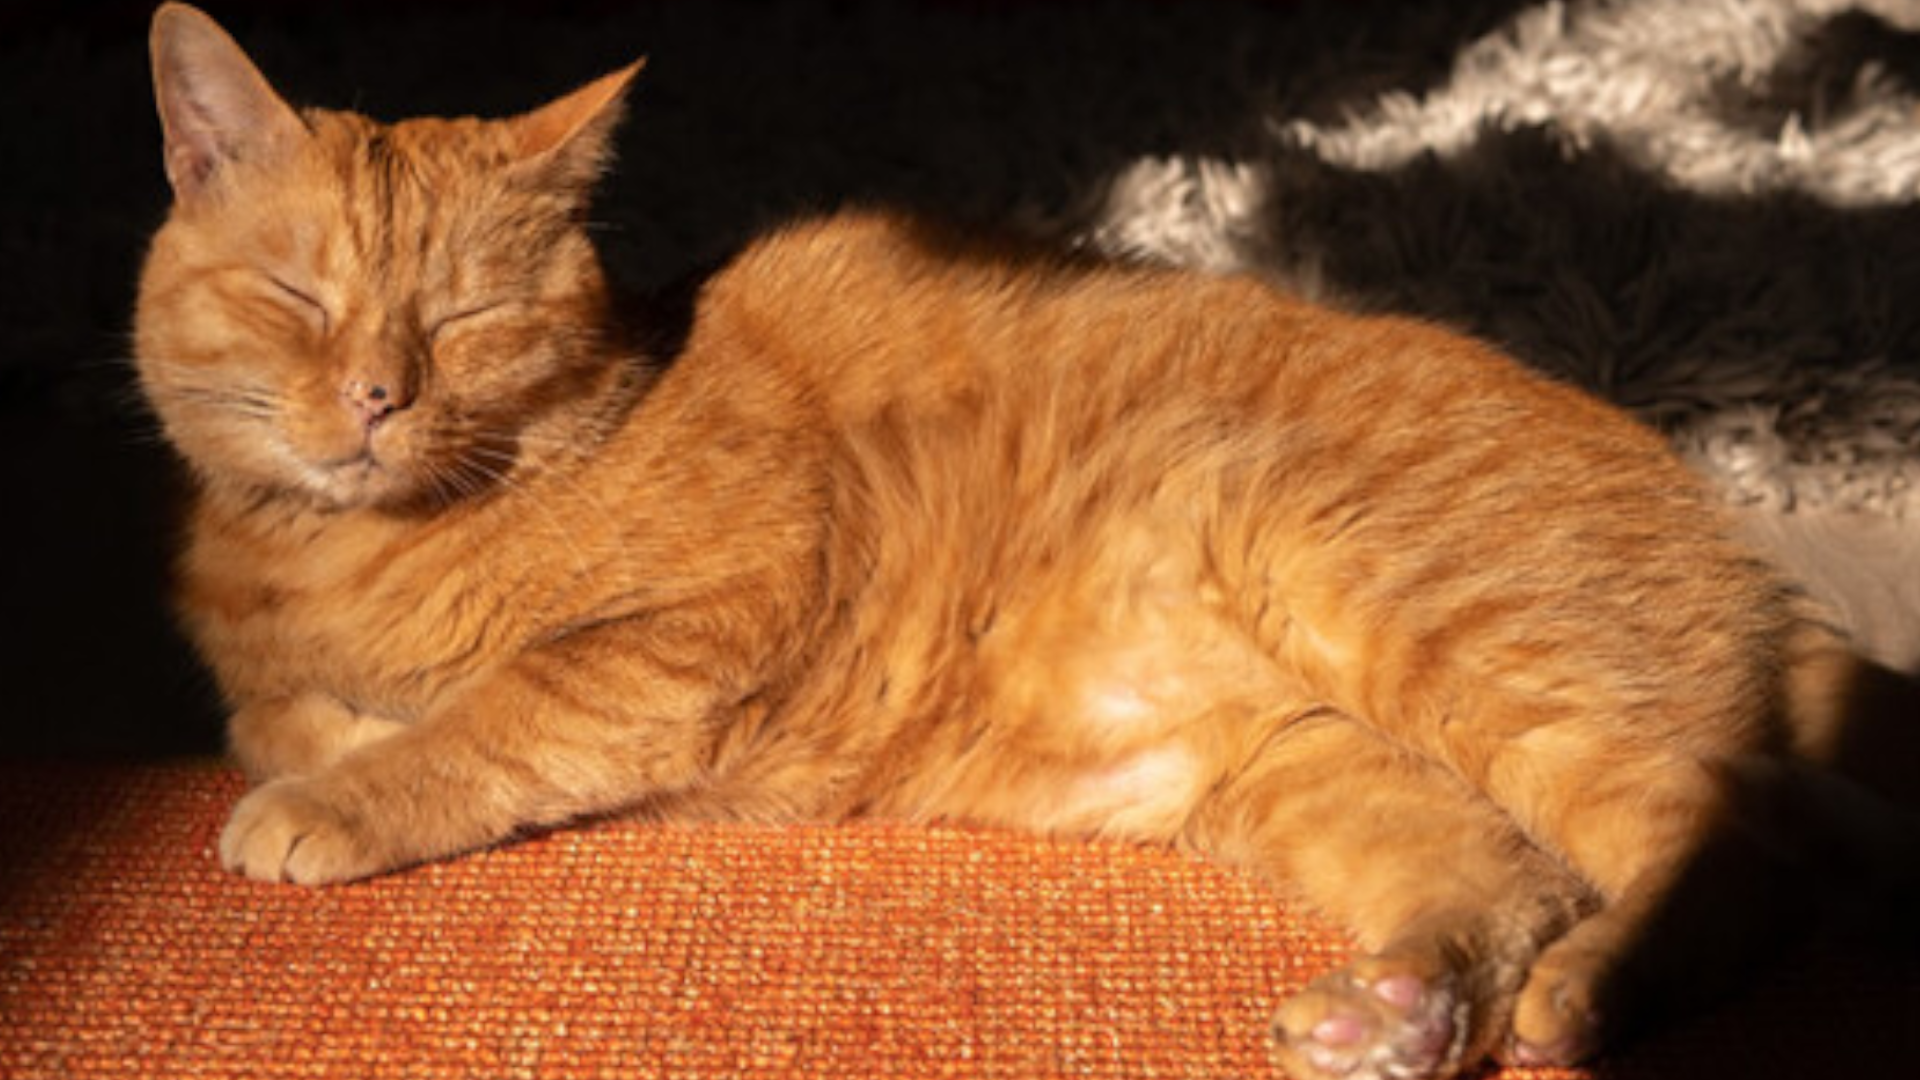 Orange tabby Murtaugh napping in the sun who is Stray's cat is partially based on